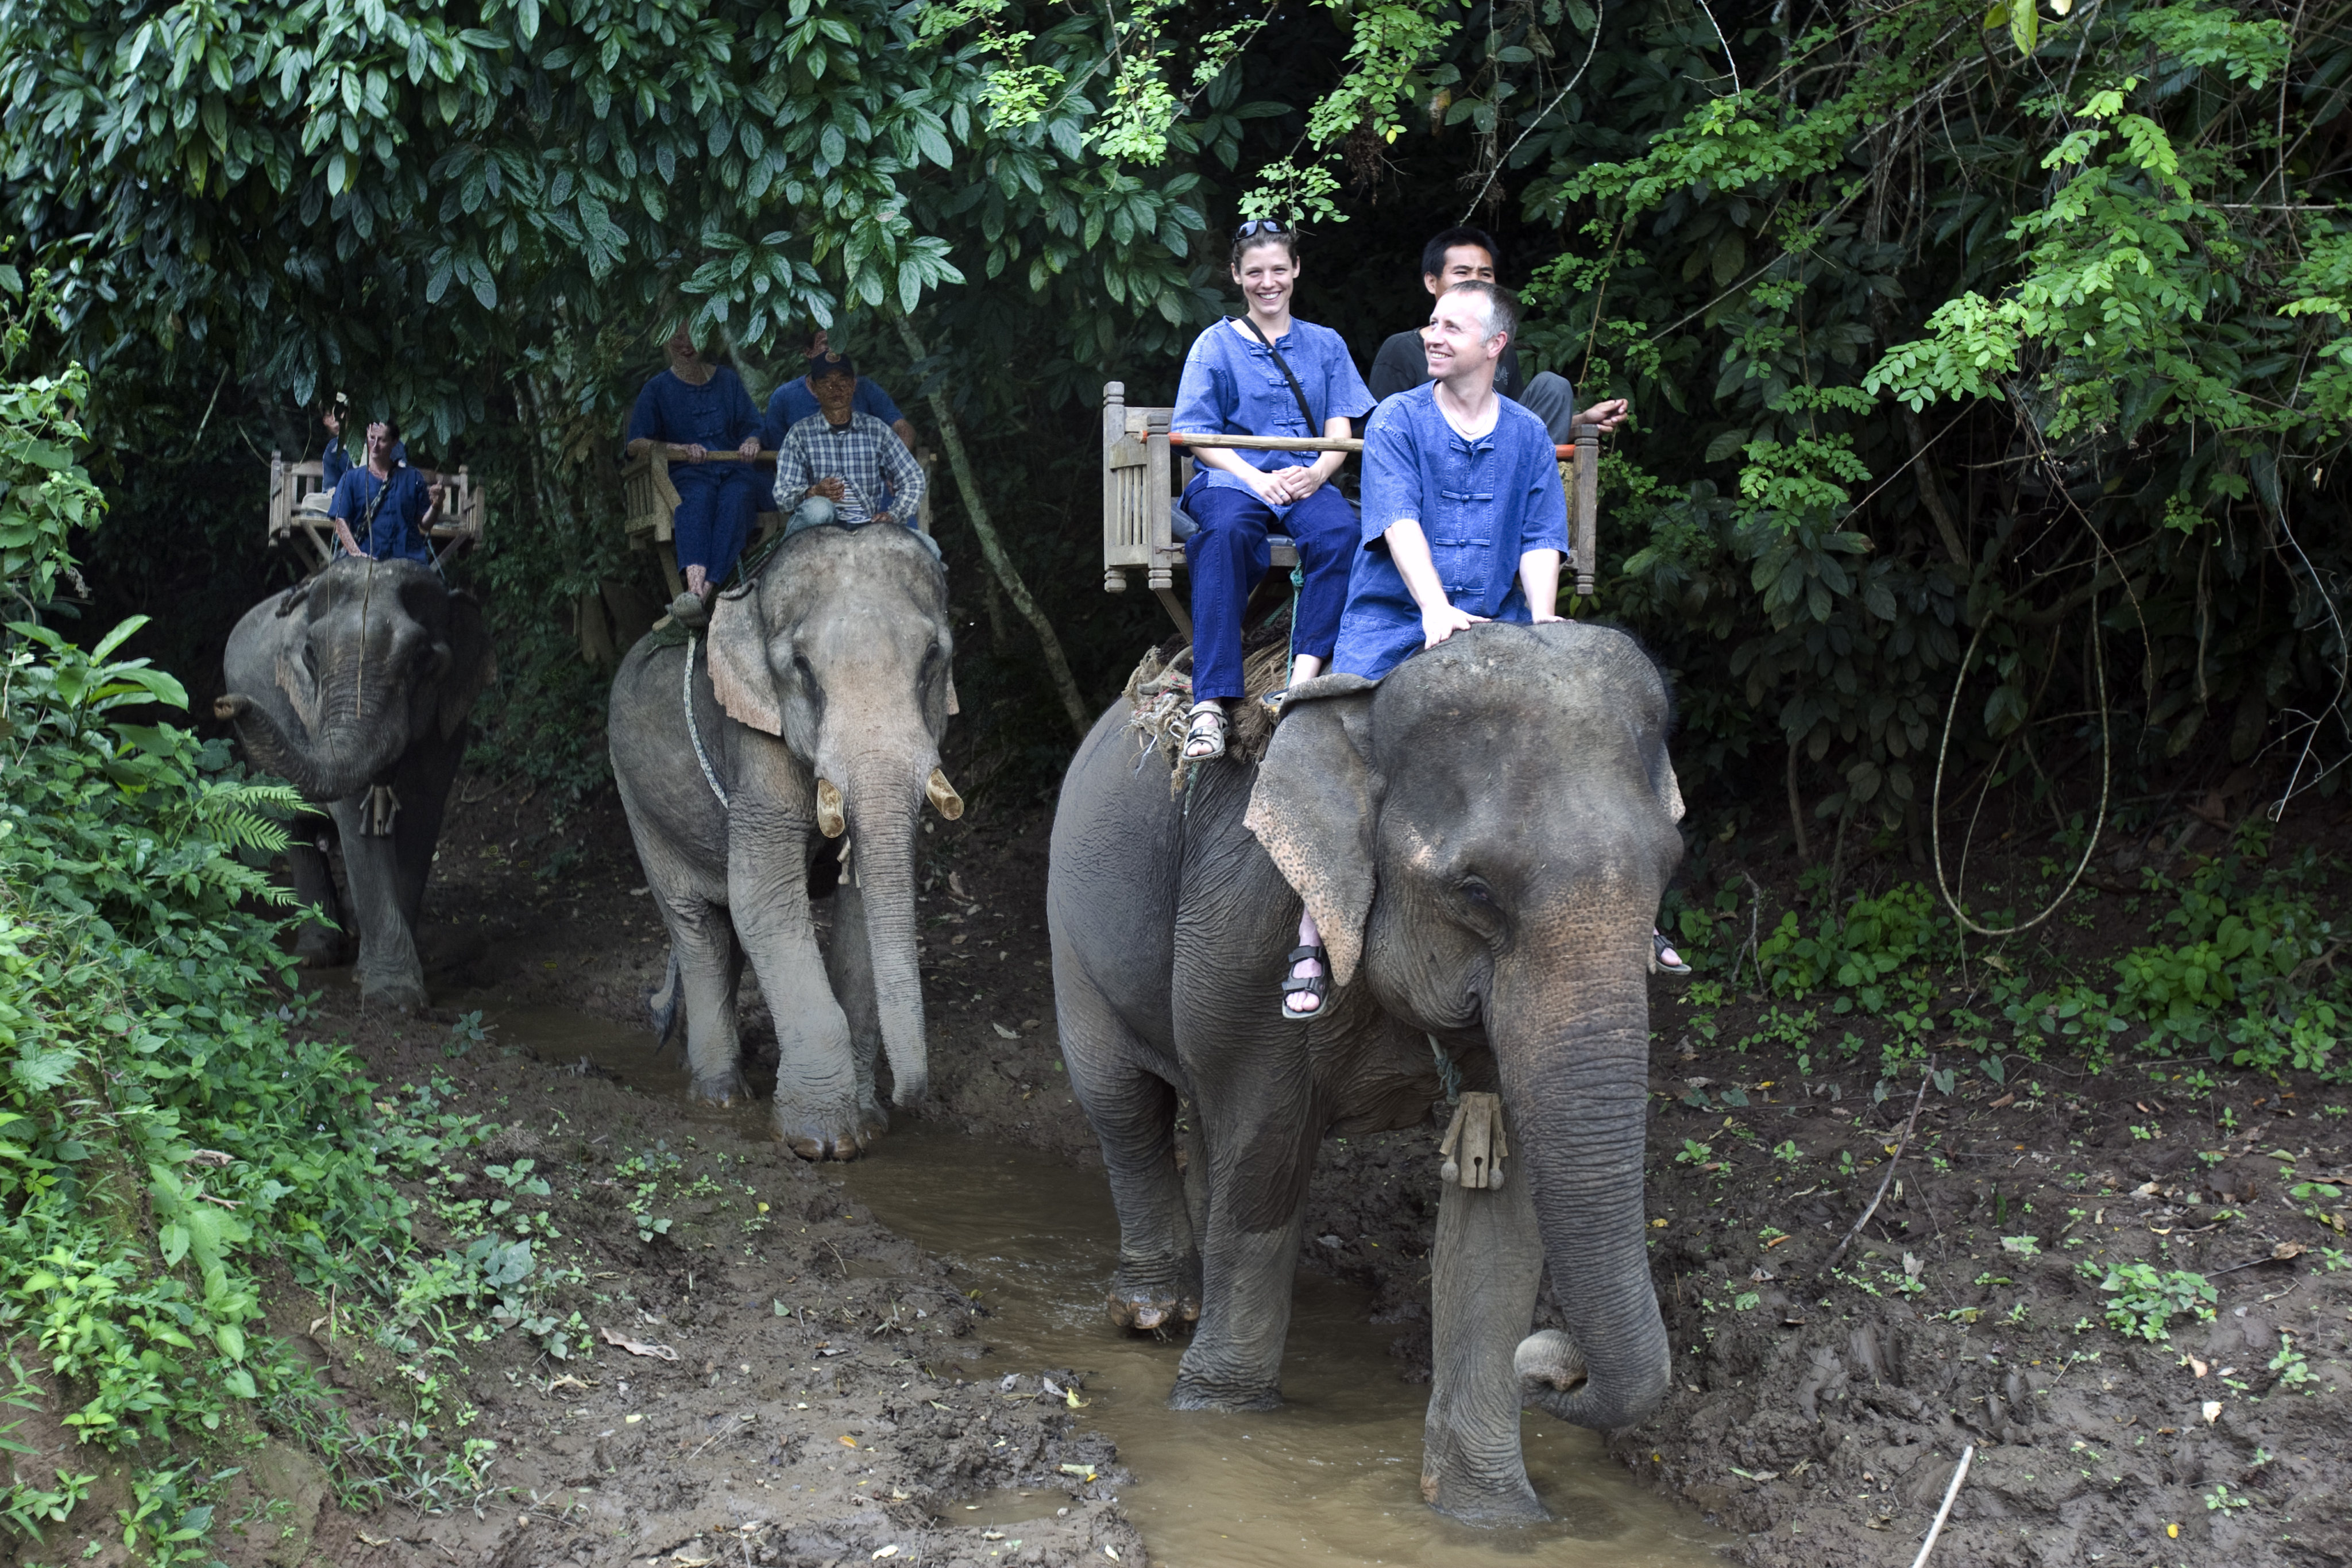 Elephant trek near Luang Prabang Laos PDR. (Photo by: Andrew Woodley/Education Images/Universal Images Group via Getty Images)&#xA;&#xA;CREDIT: GETTY IMAGES